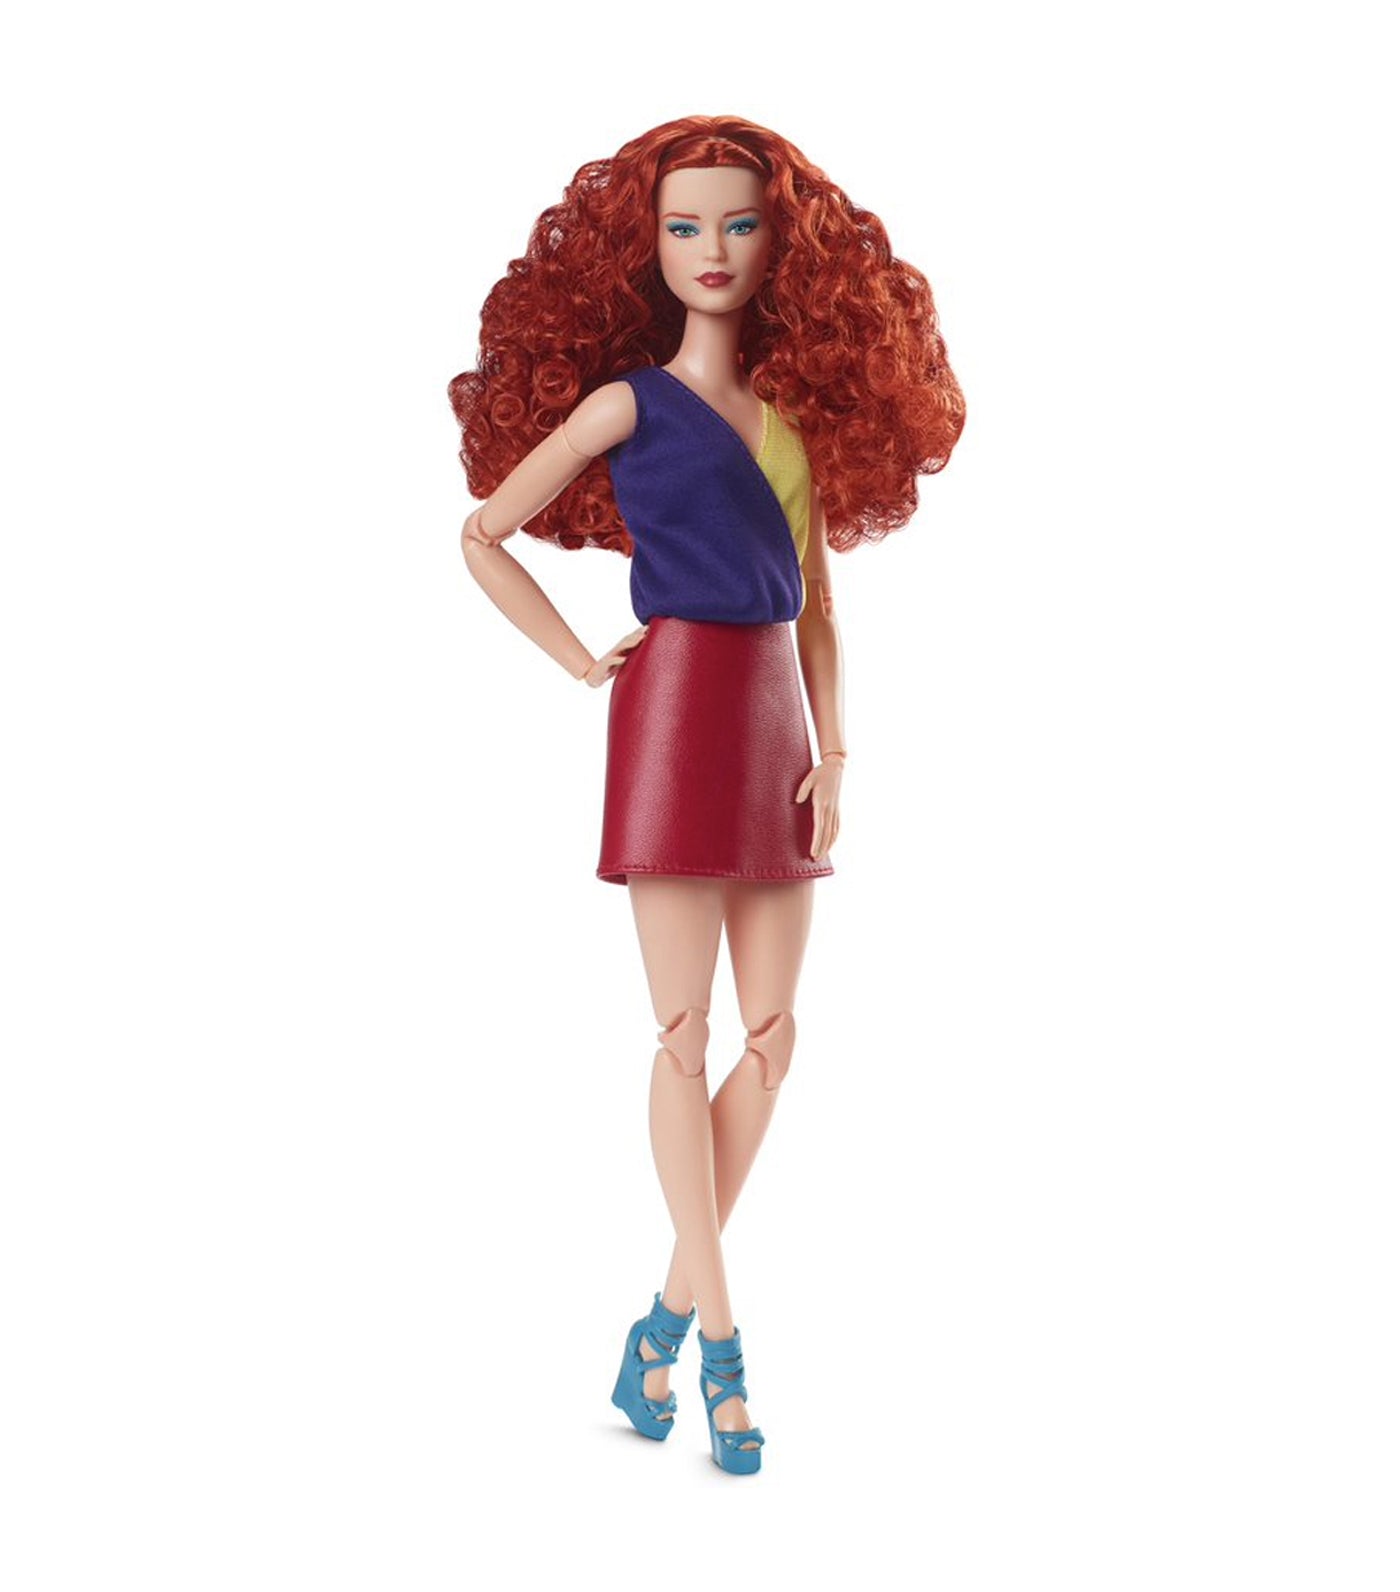 Signature Looks - Red Hair Doll